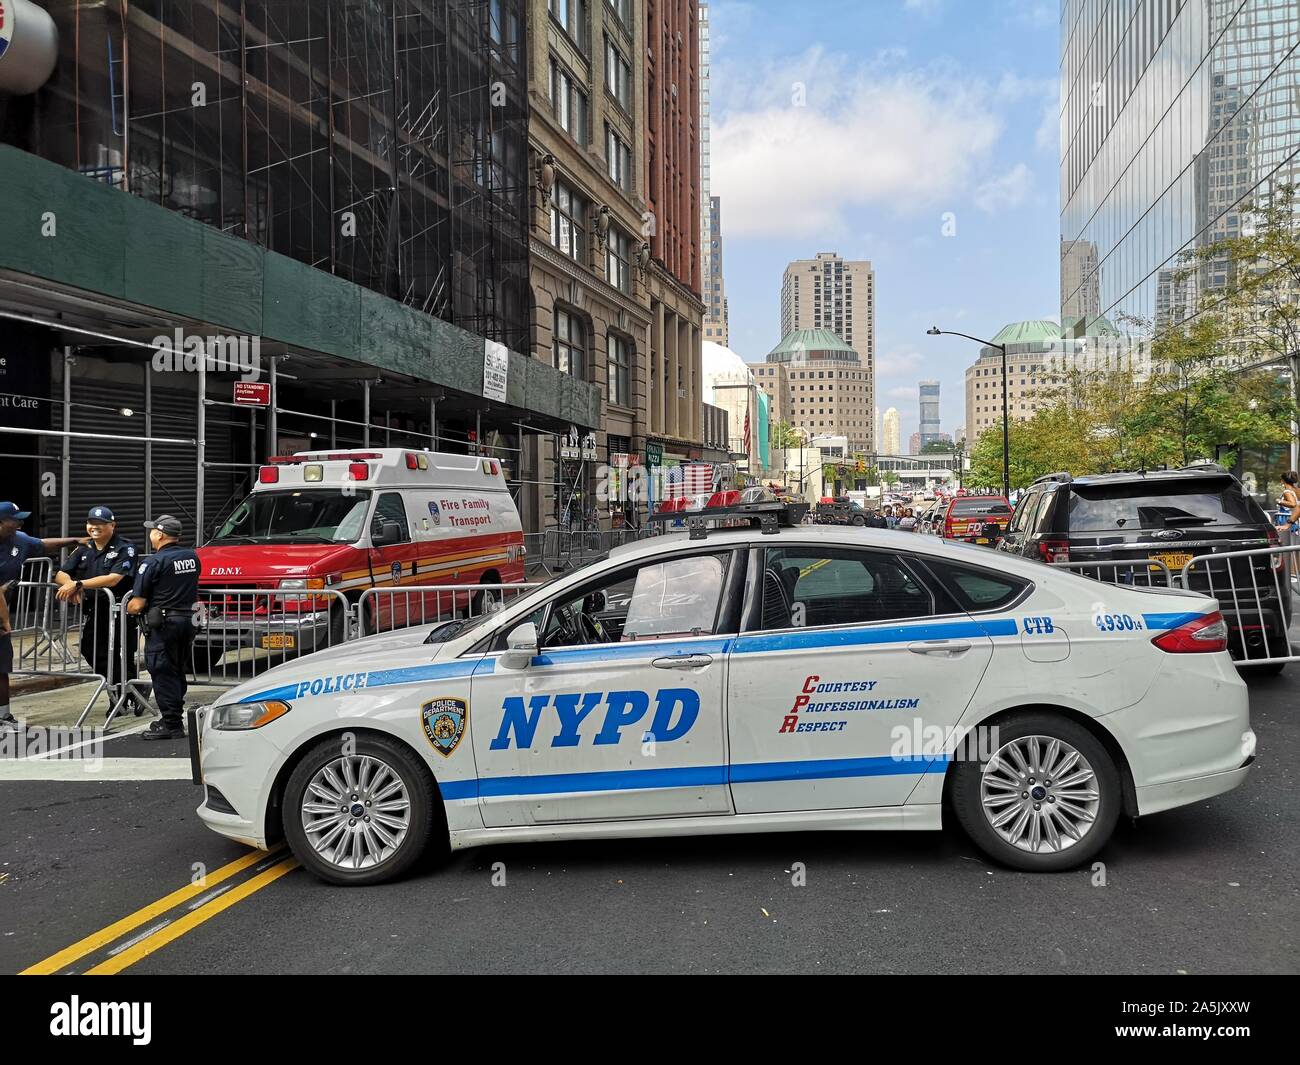 Nypd Blue Car Stock Photos & Nypd Blue Car Stock Images - Alamy